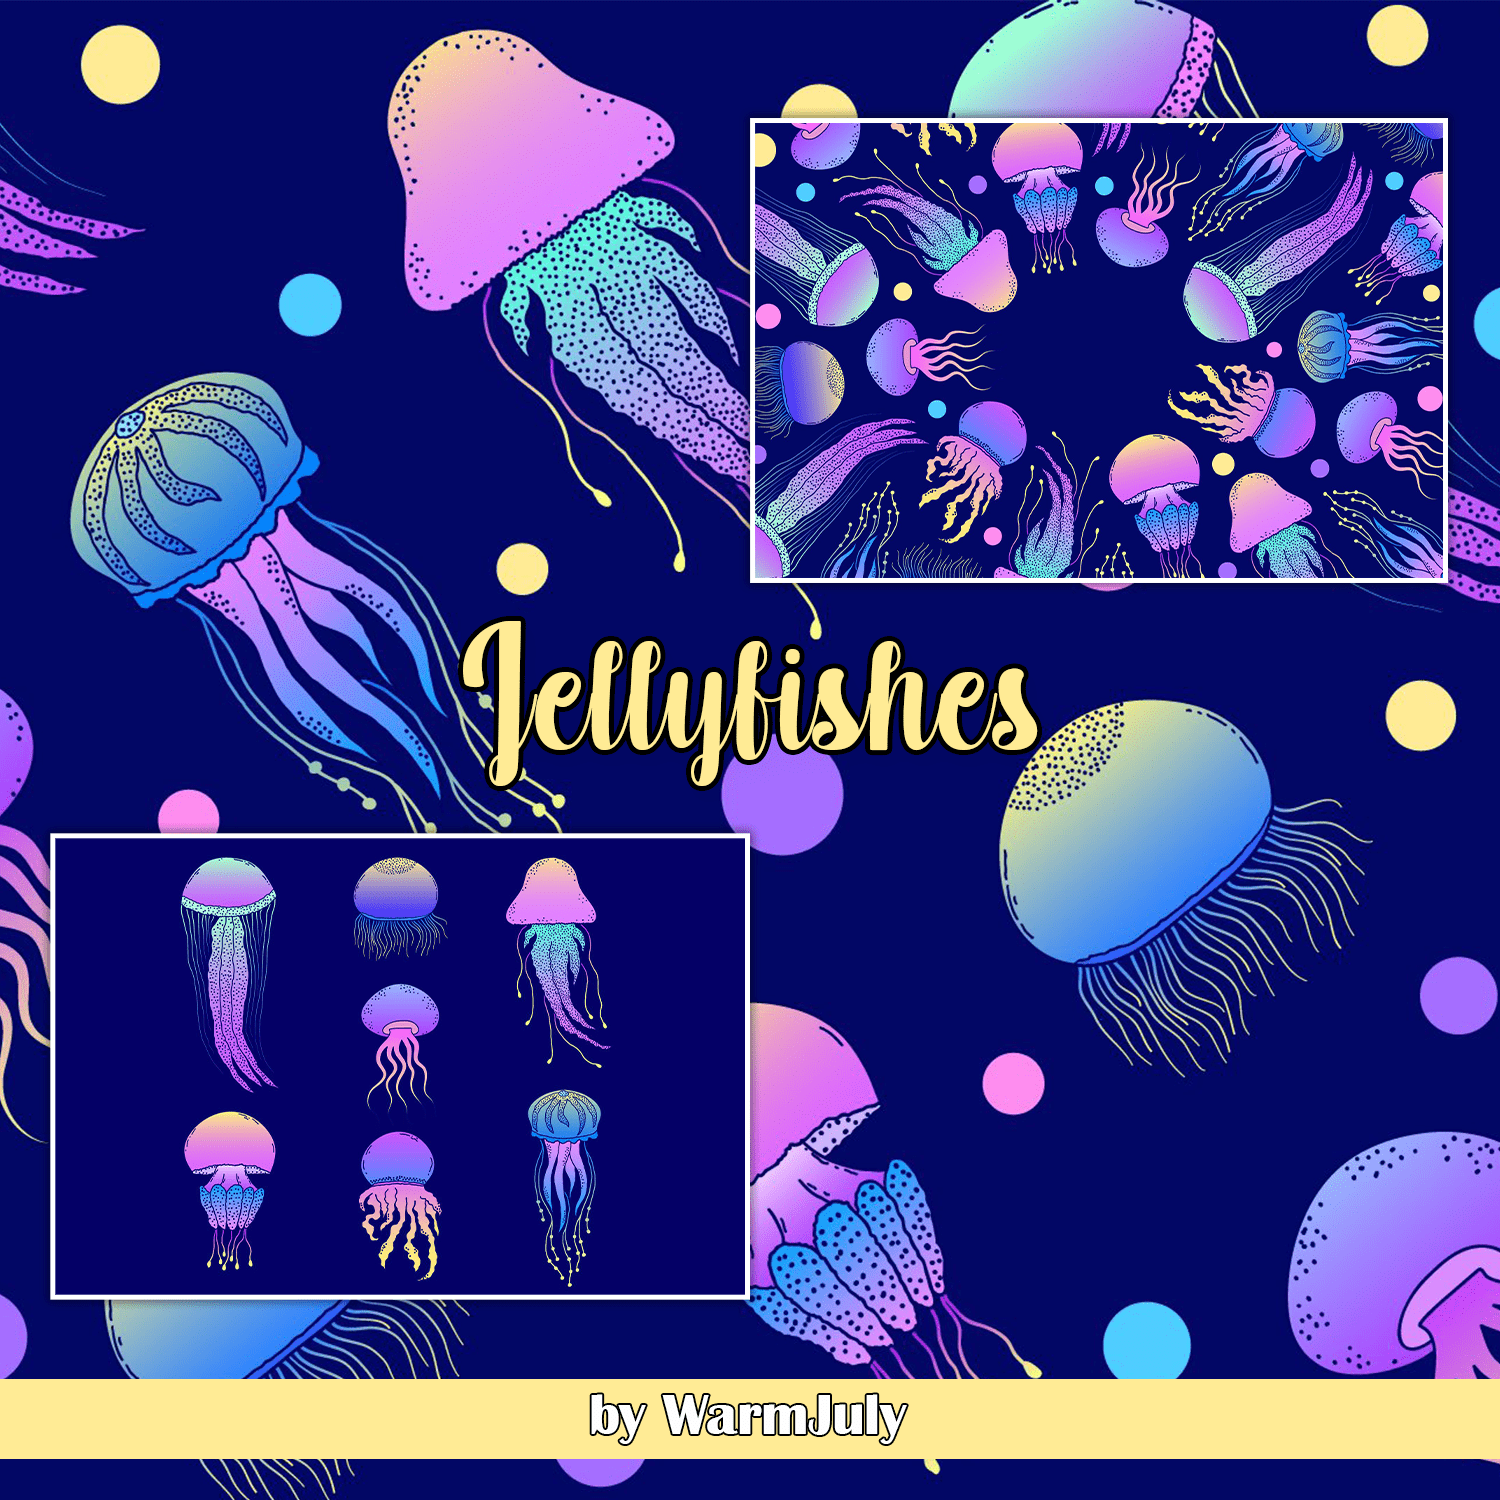 Jellyfishes cover.